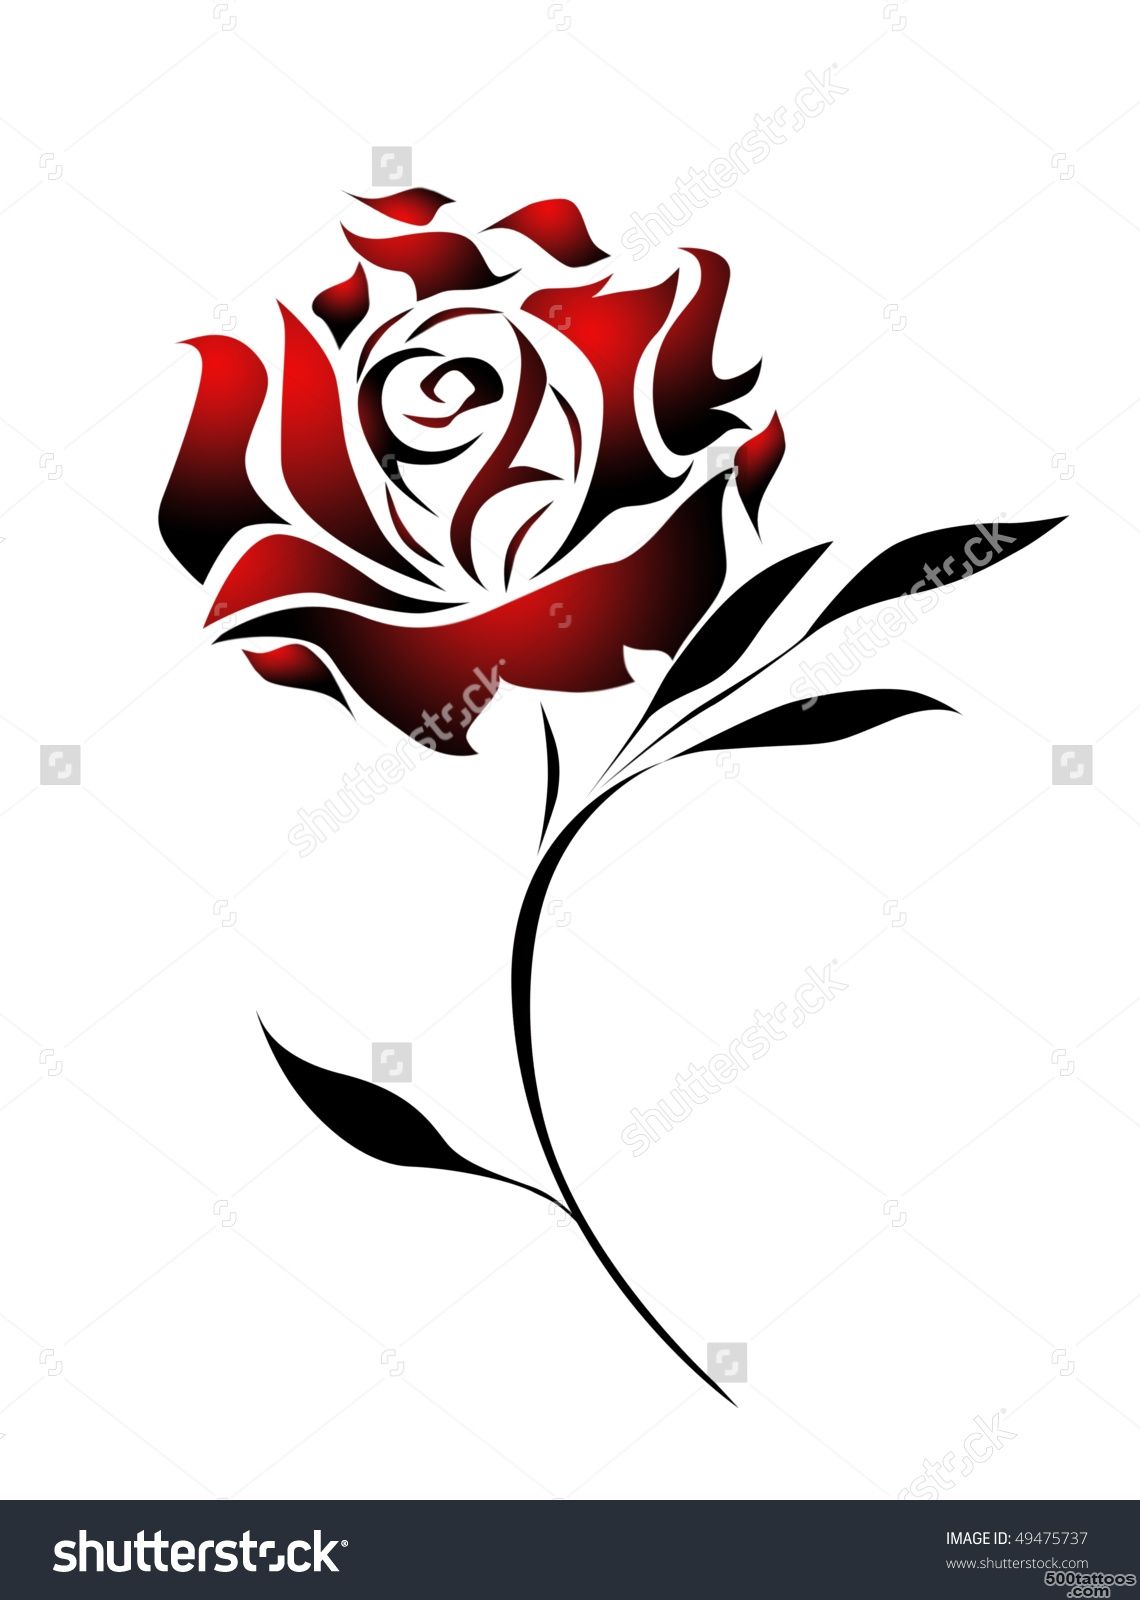 Red Rose Tattoo Design With Path Stock Photo 49475737  Shutterstock_39